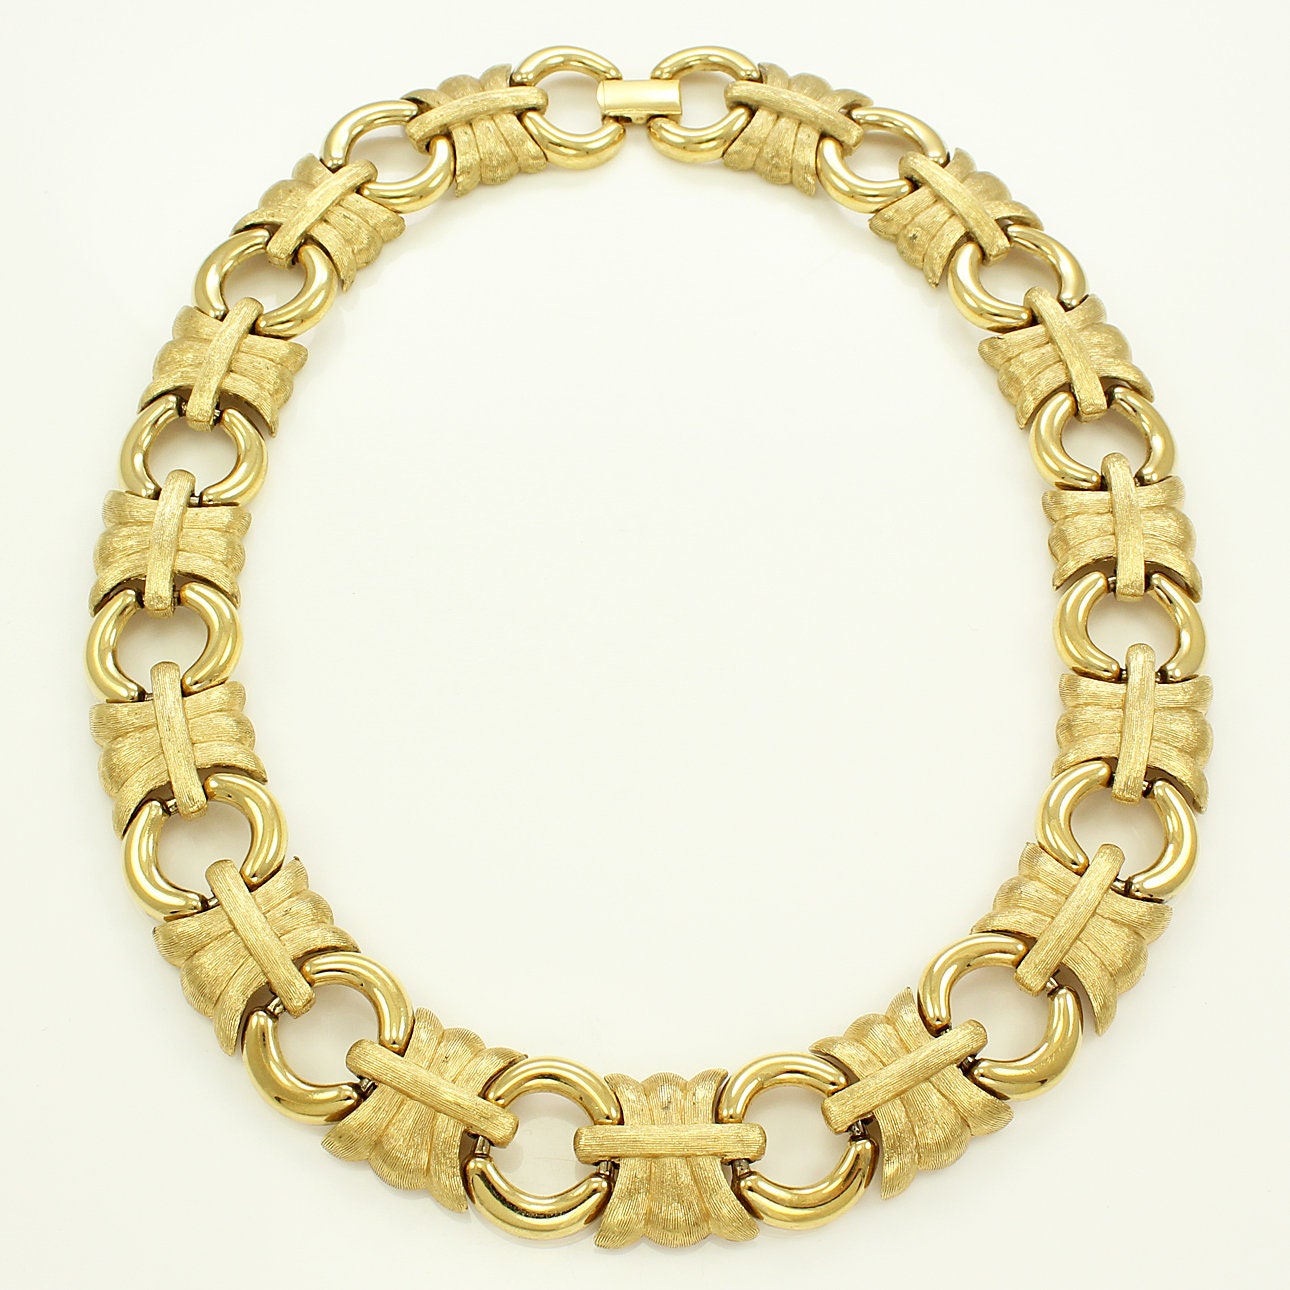 Vintage Givenchy Gold Tone Runway Necklace - 1980s Statement Jewelry